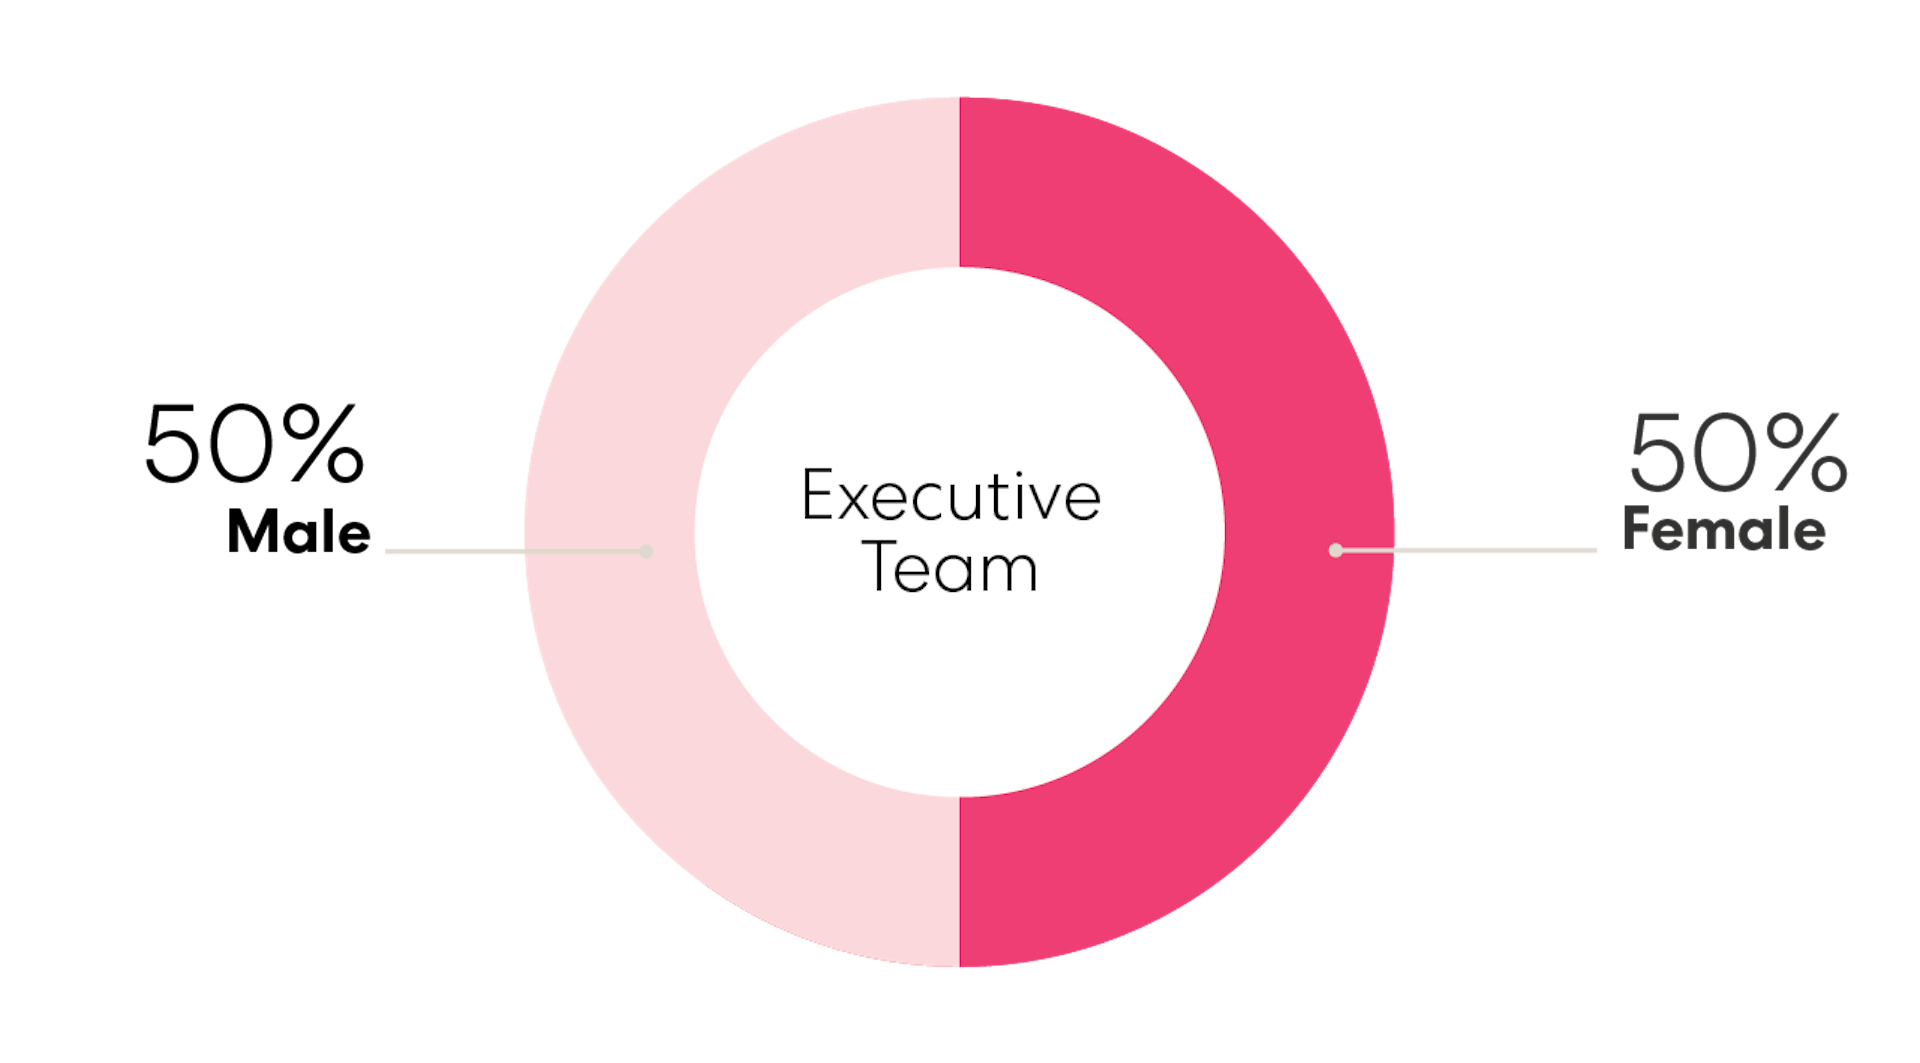 A pink pie chart showing the male/female split of Sharesies' Executive Leadership Team, 50% identify as male and 50% identify as female. 